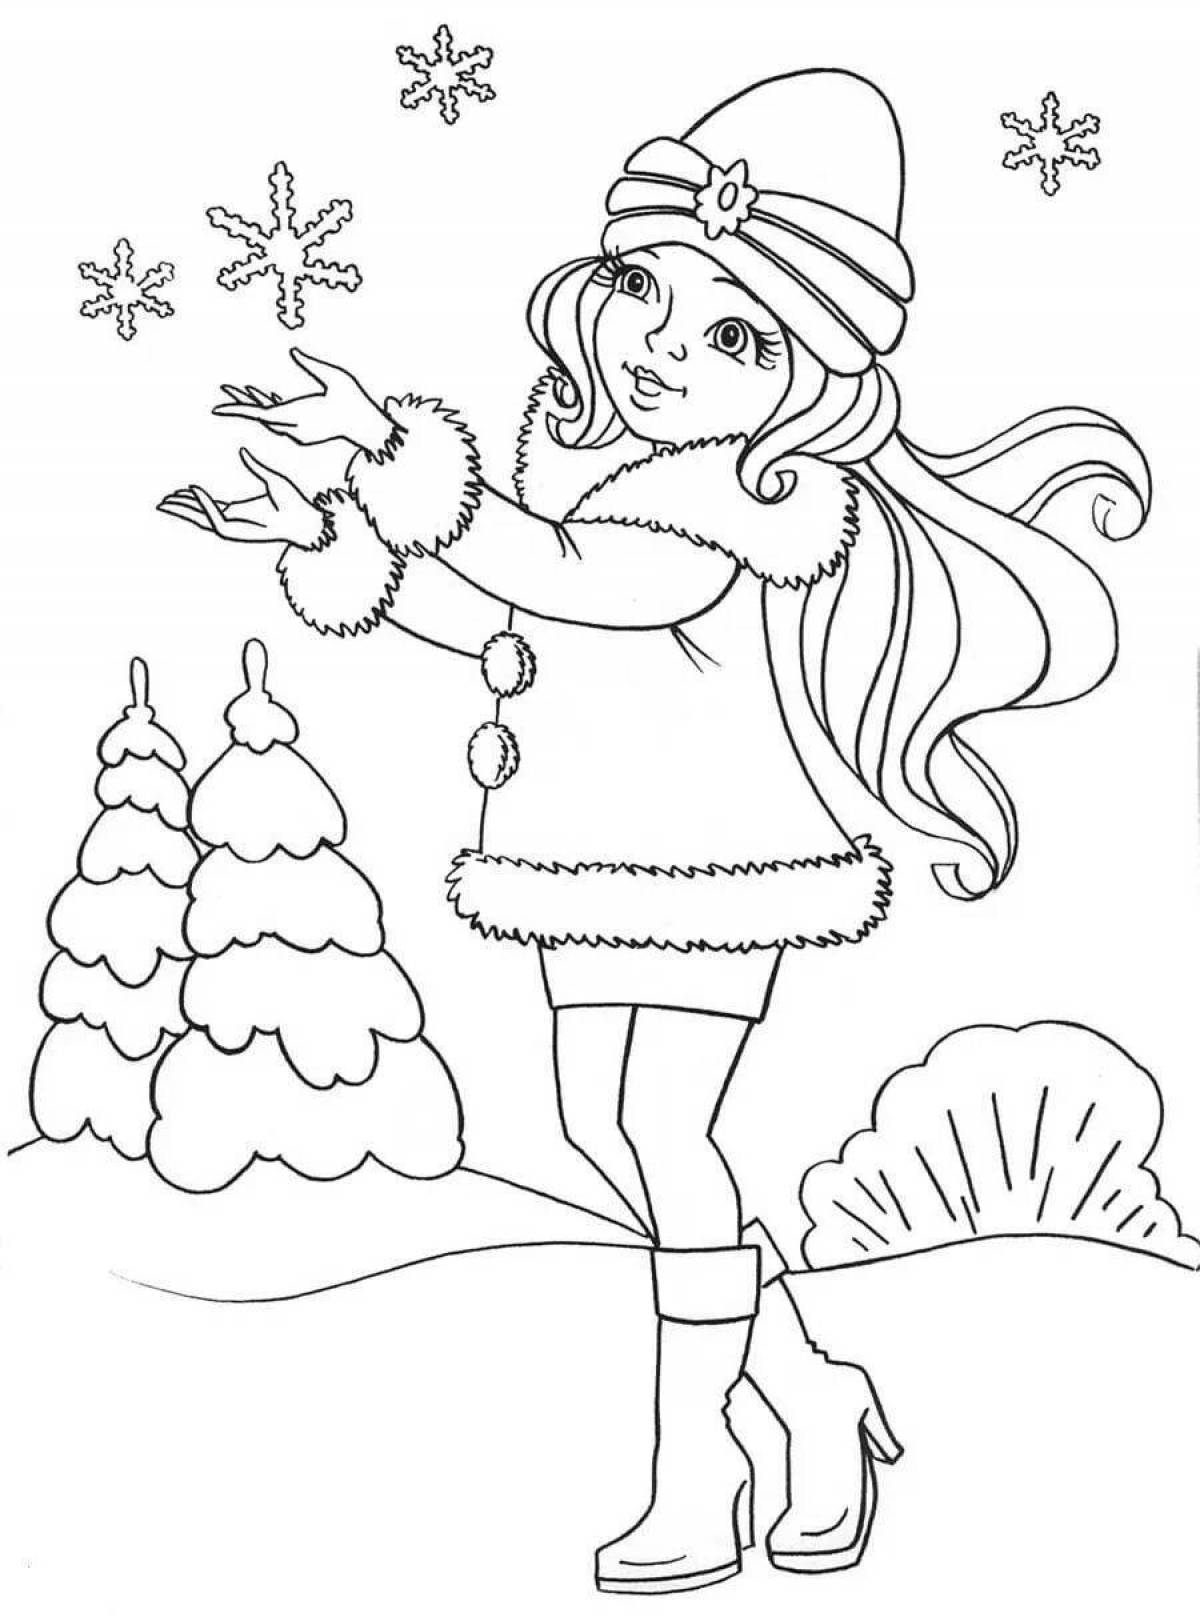 Glowing winter coloring book for children 10 years old